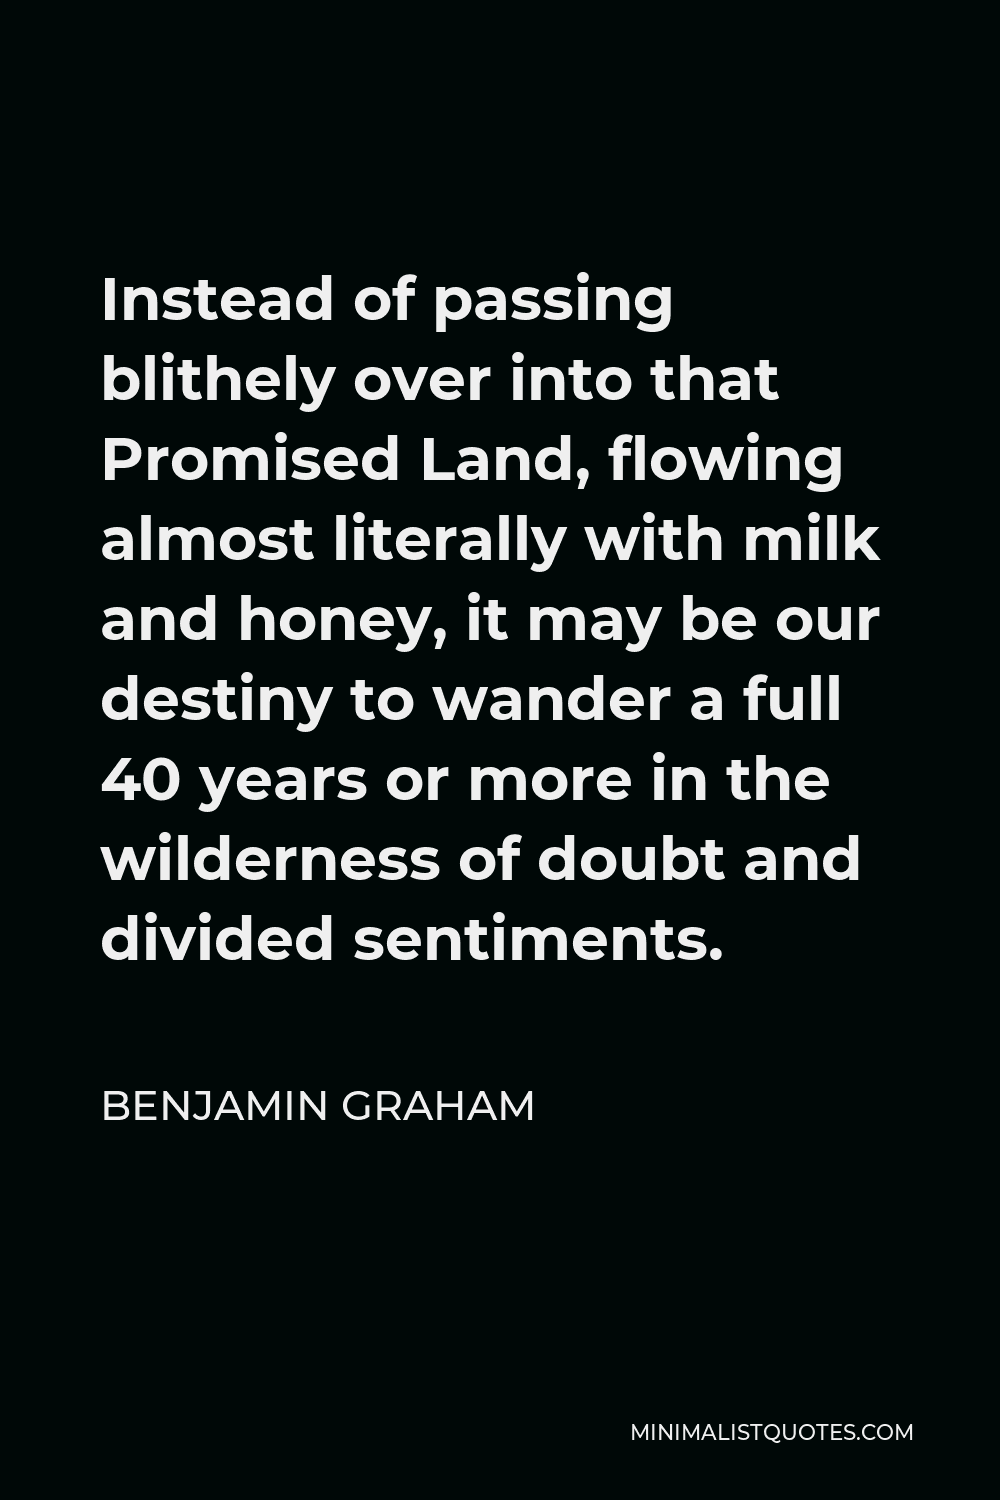 Benjamin Graham Quote - Instead of passing blithely over into that Promised Land, flowing almost literally with milk and honey, it may be our destiny to wander a full 40 years or more in the wilderness of doubt and divided sentiments.